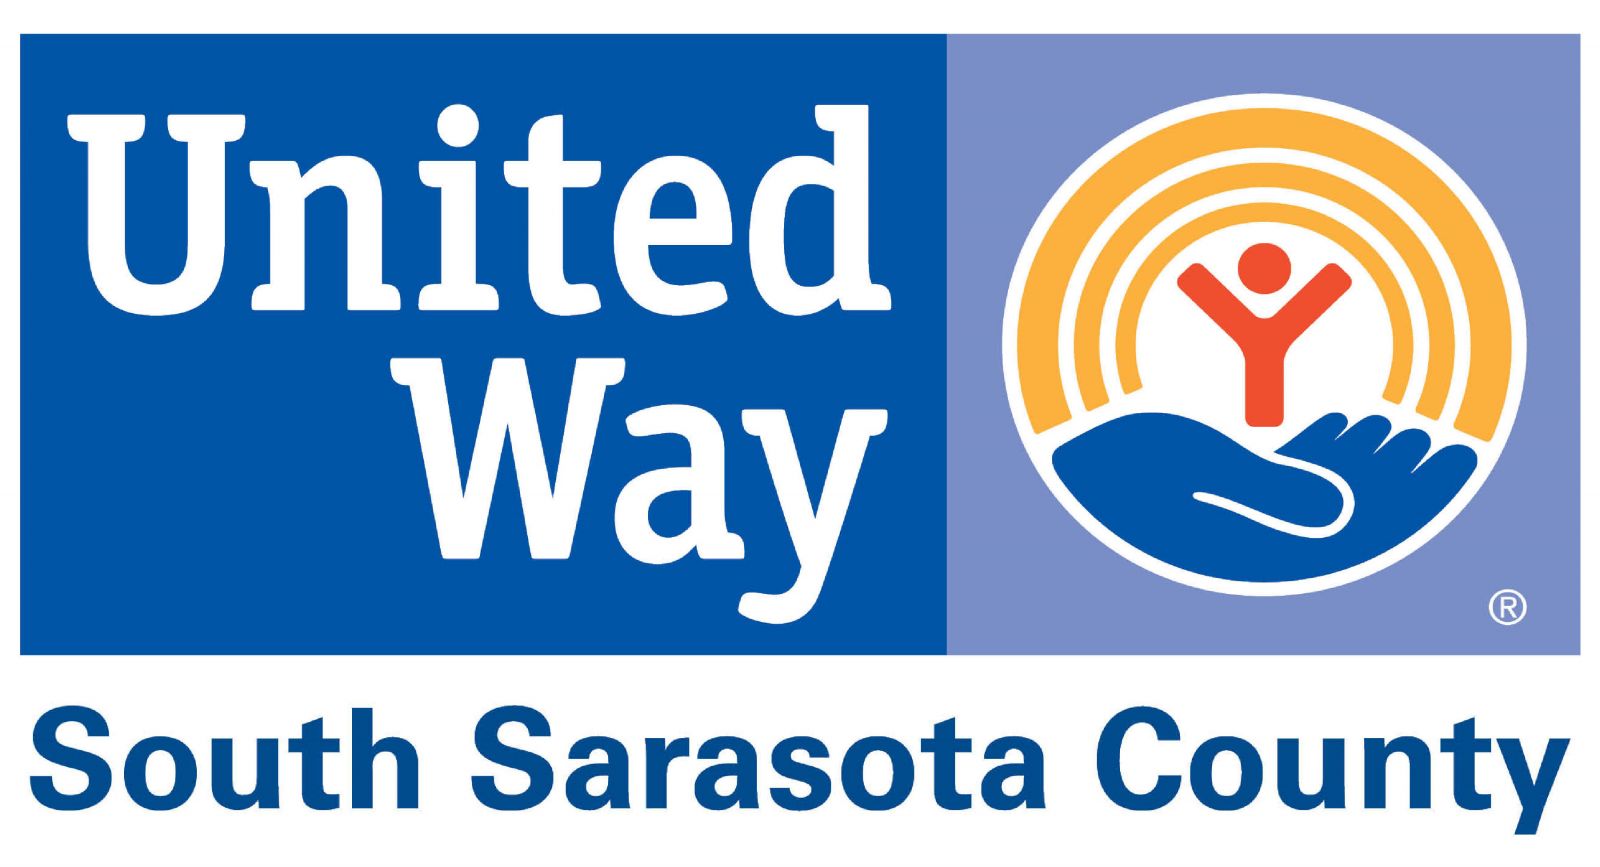 If you are looking for a great way to get your business’ name out there, not to mention support your local community, a sponsorship of the annual community engagement luncheon with the United Way of South Sarasota County is a wonderful opportunity.